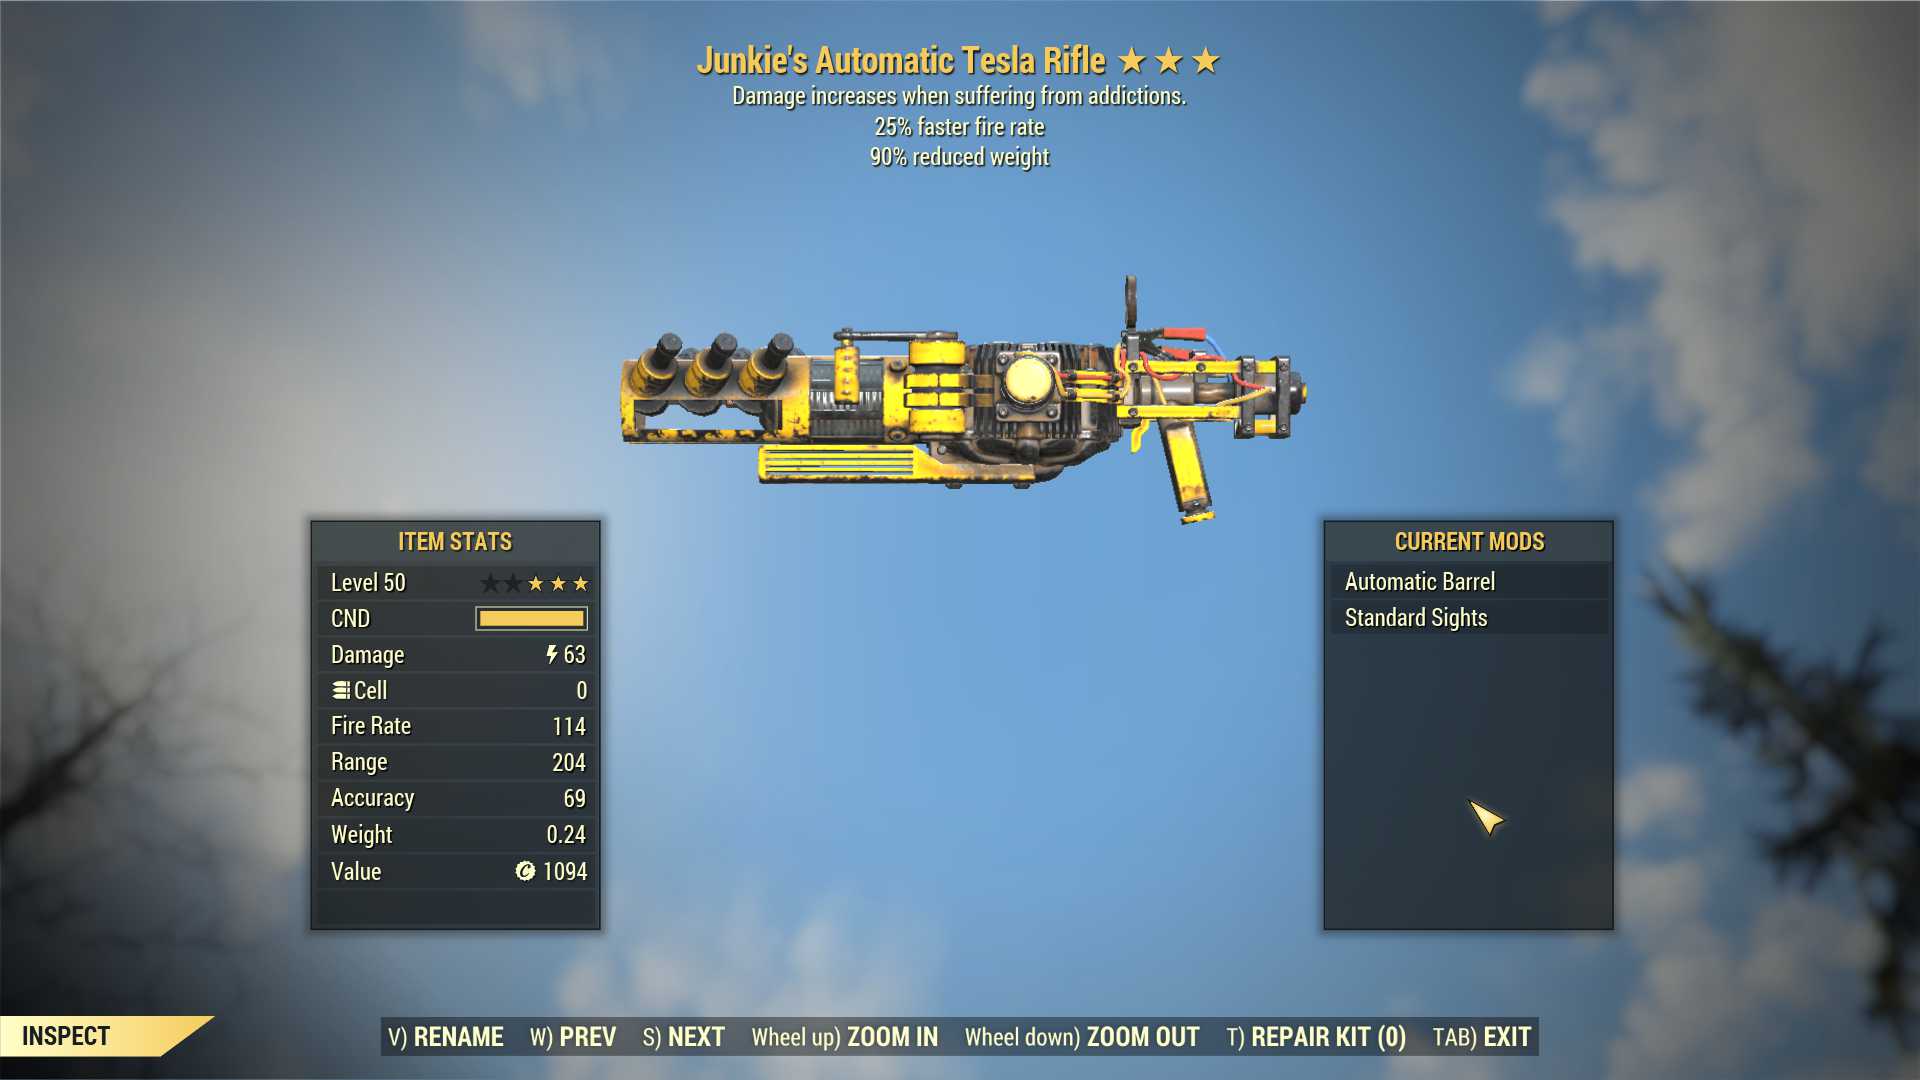 Junkie's Tesla rifle (25% faster fire rate, 90% reduced weight)